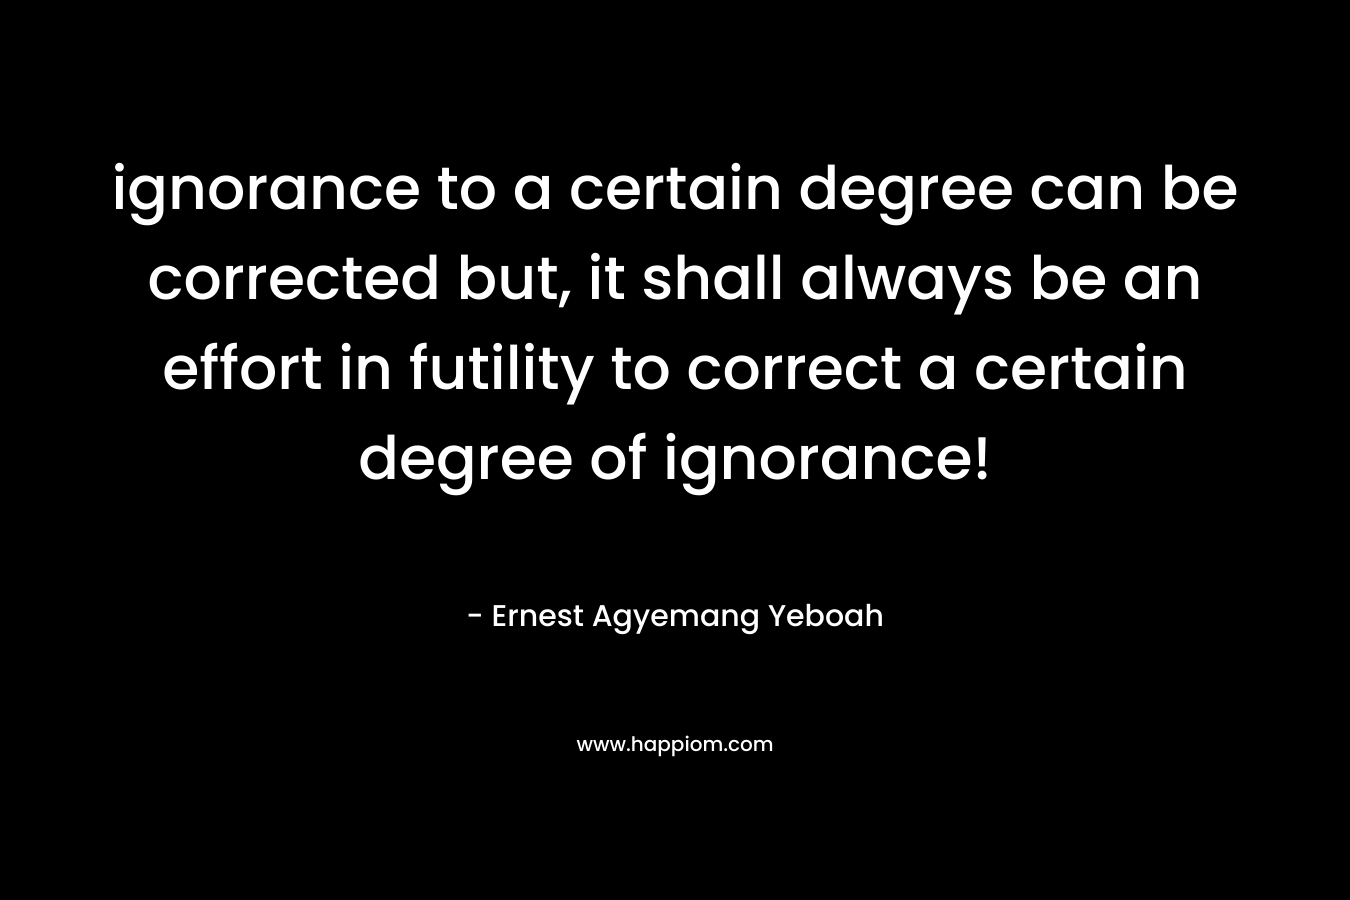 ignorance to a certain degree can be corrected but, it shall always be an effort in futility to correct a certain degree of ignorance!